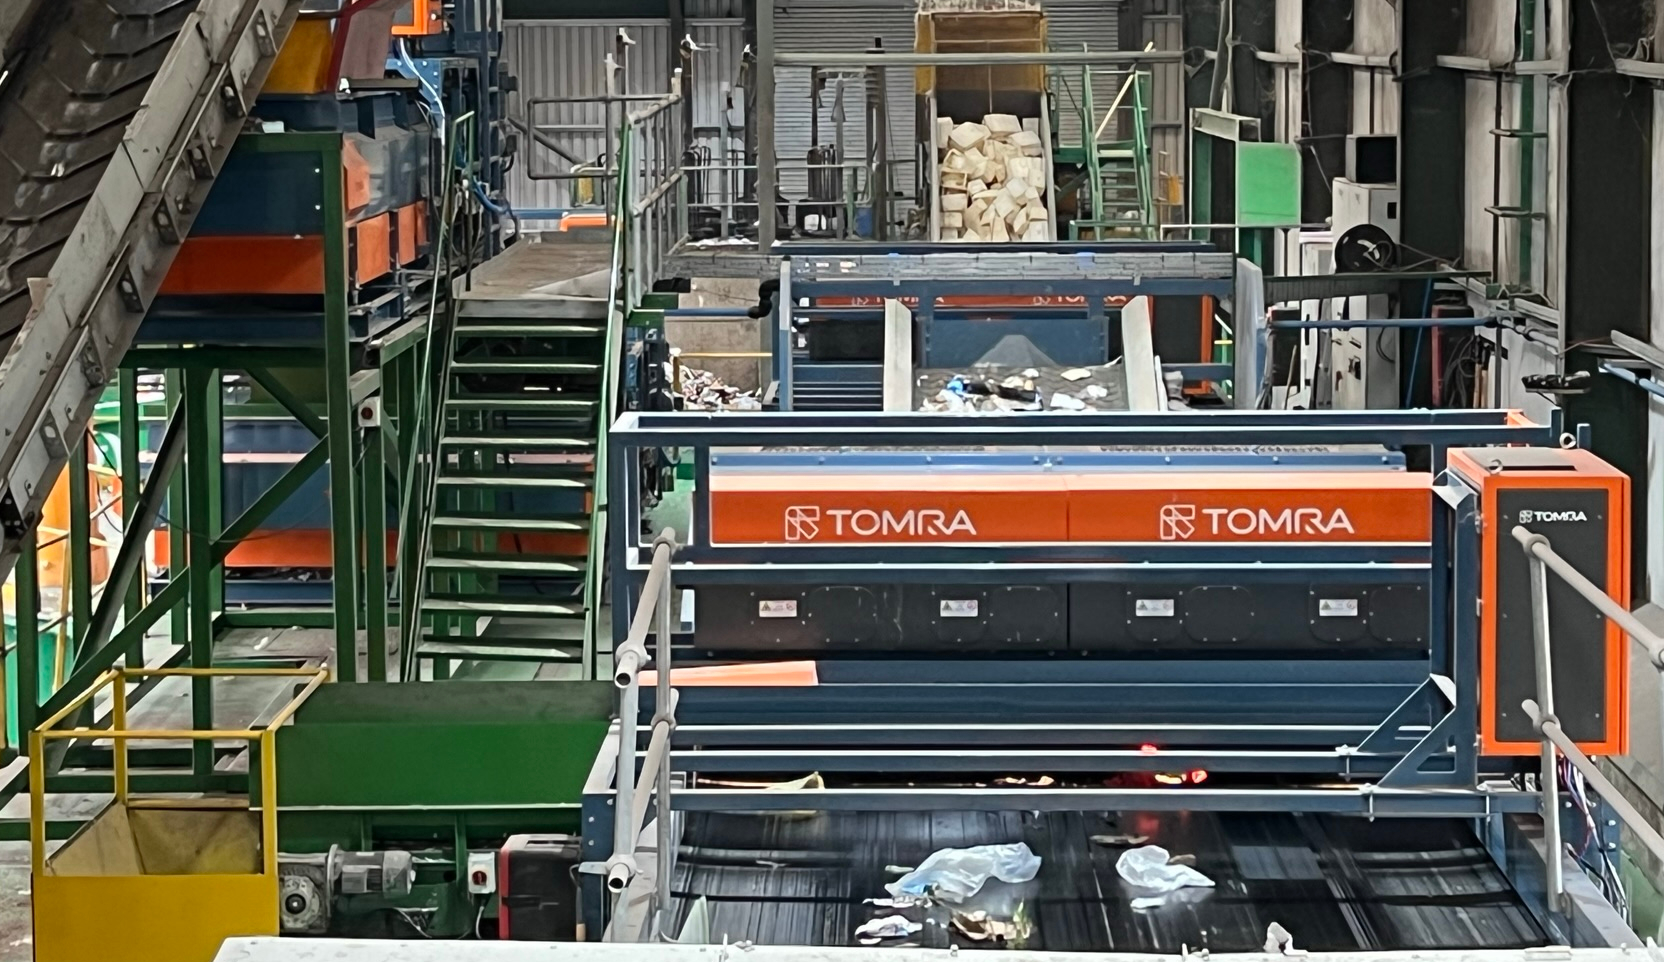 TOMRA plays a key role in helping Green Recycling achieve its goal of establishing the UK’s first picker-less C&I MRF